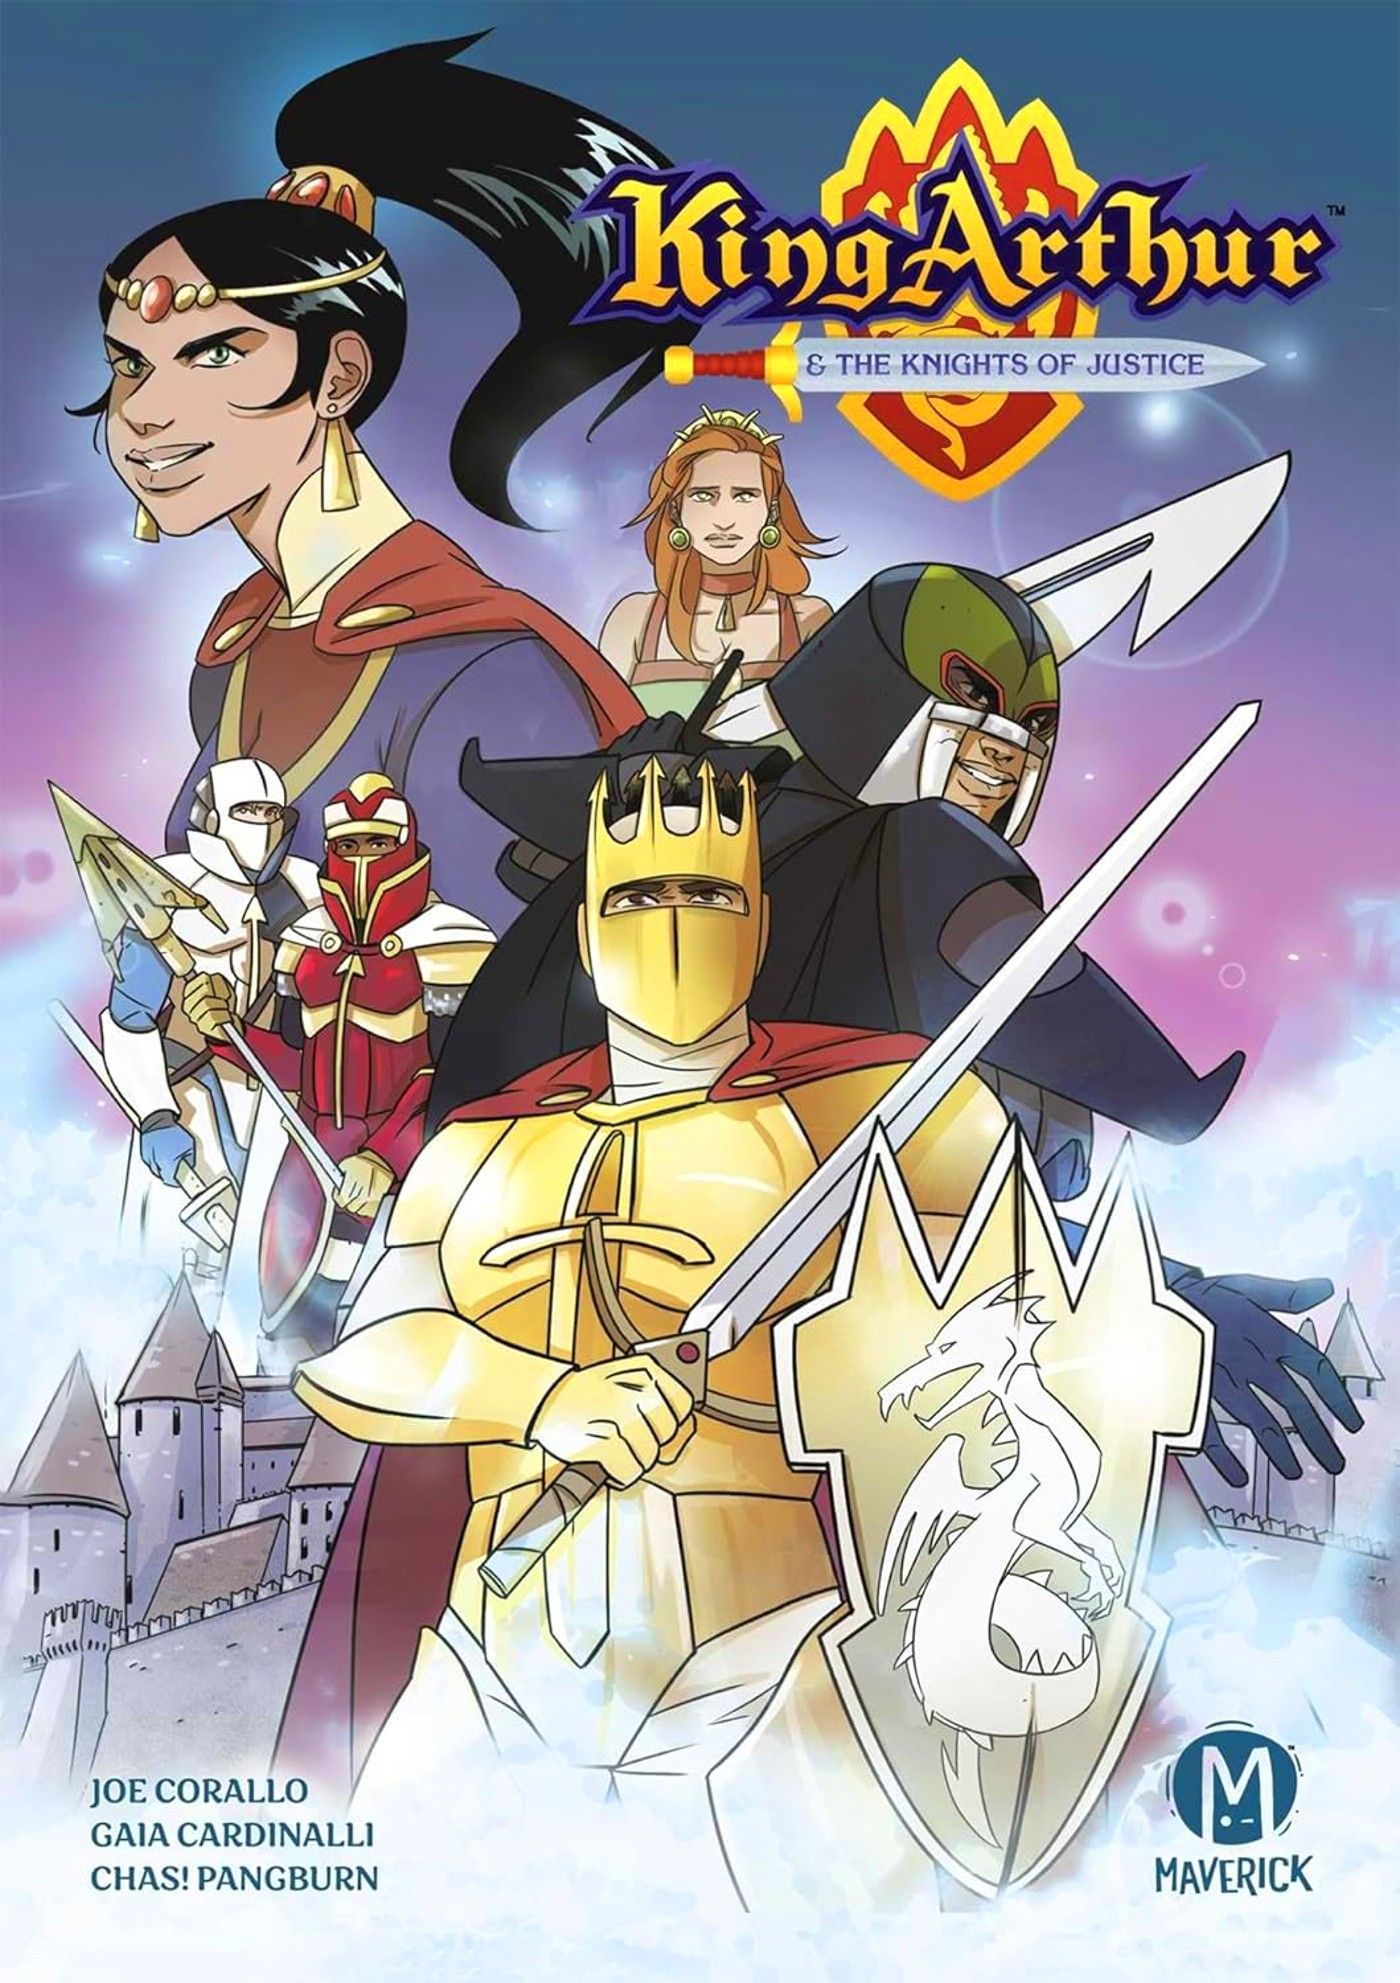 ‘King Arthur & The Knights of Justice’ Make A Heroic Return in Comic Book Form (Exclusive)